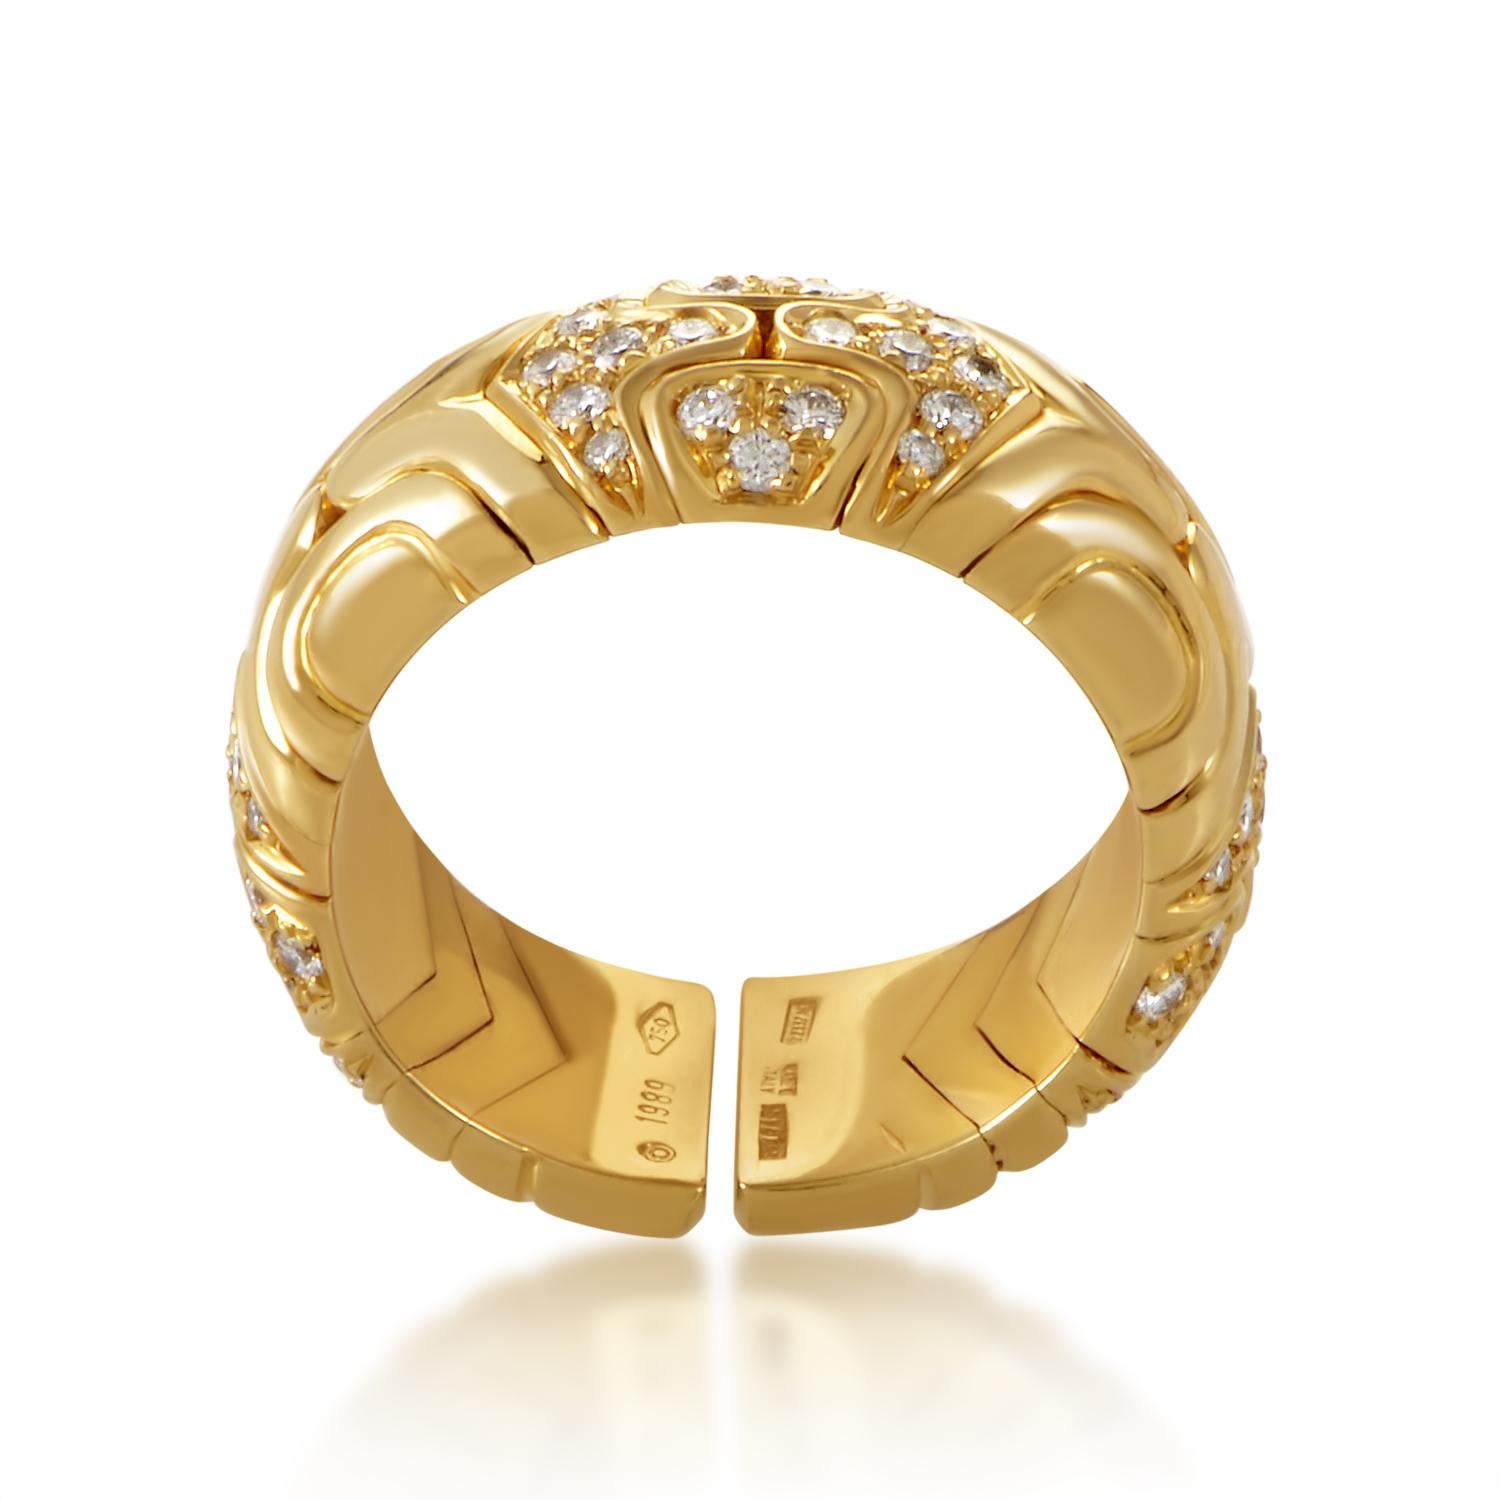 Bearing the intriguing, quintessential Bvlgari pattern upon its gleaming surface, the elegant 18K yellow gold body of this outstanding ring is also graced with glittering diamonds for that special touch of glaring glamour.